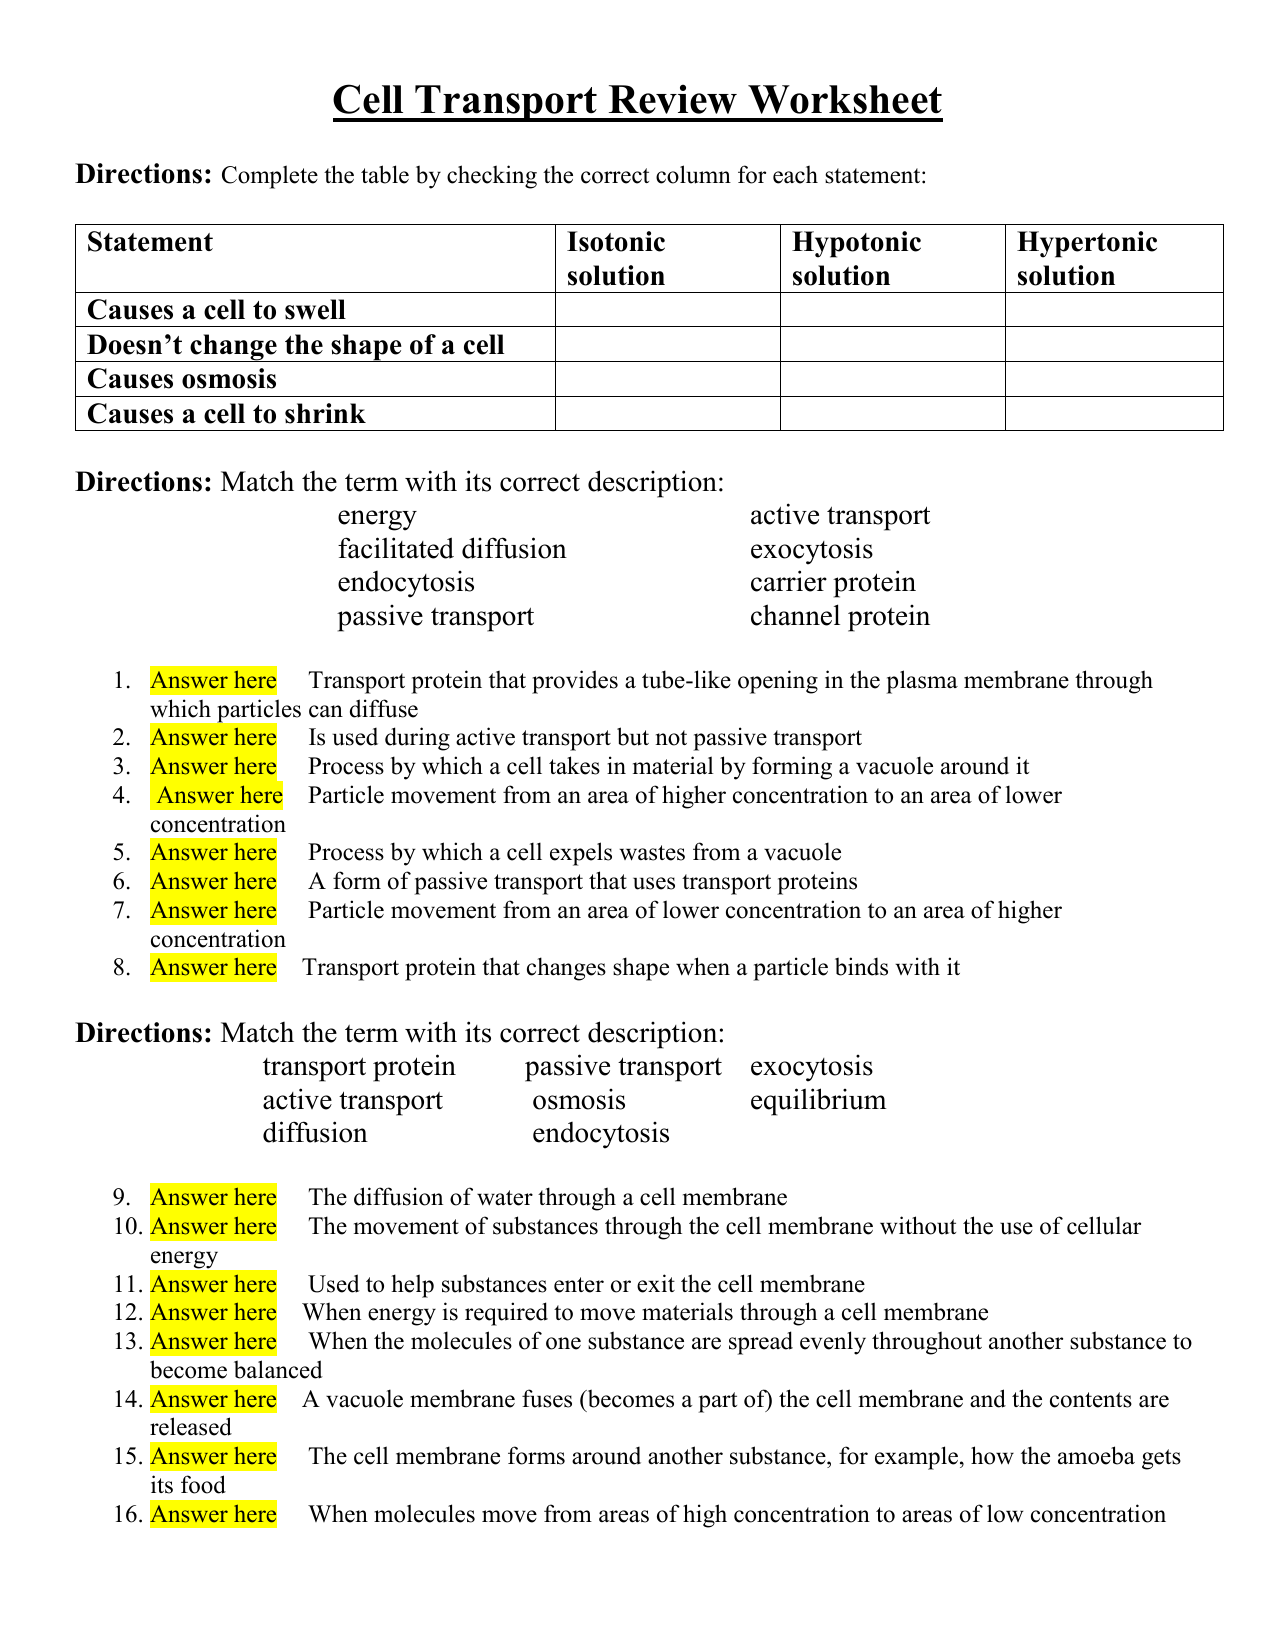 Noah Loya - Cell Transport & Review Worksheet With Regard To Cell Transport Worksheet Answers